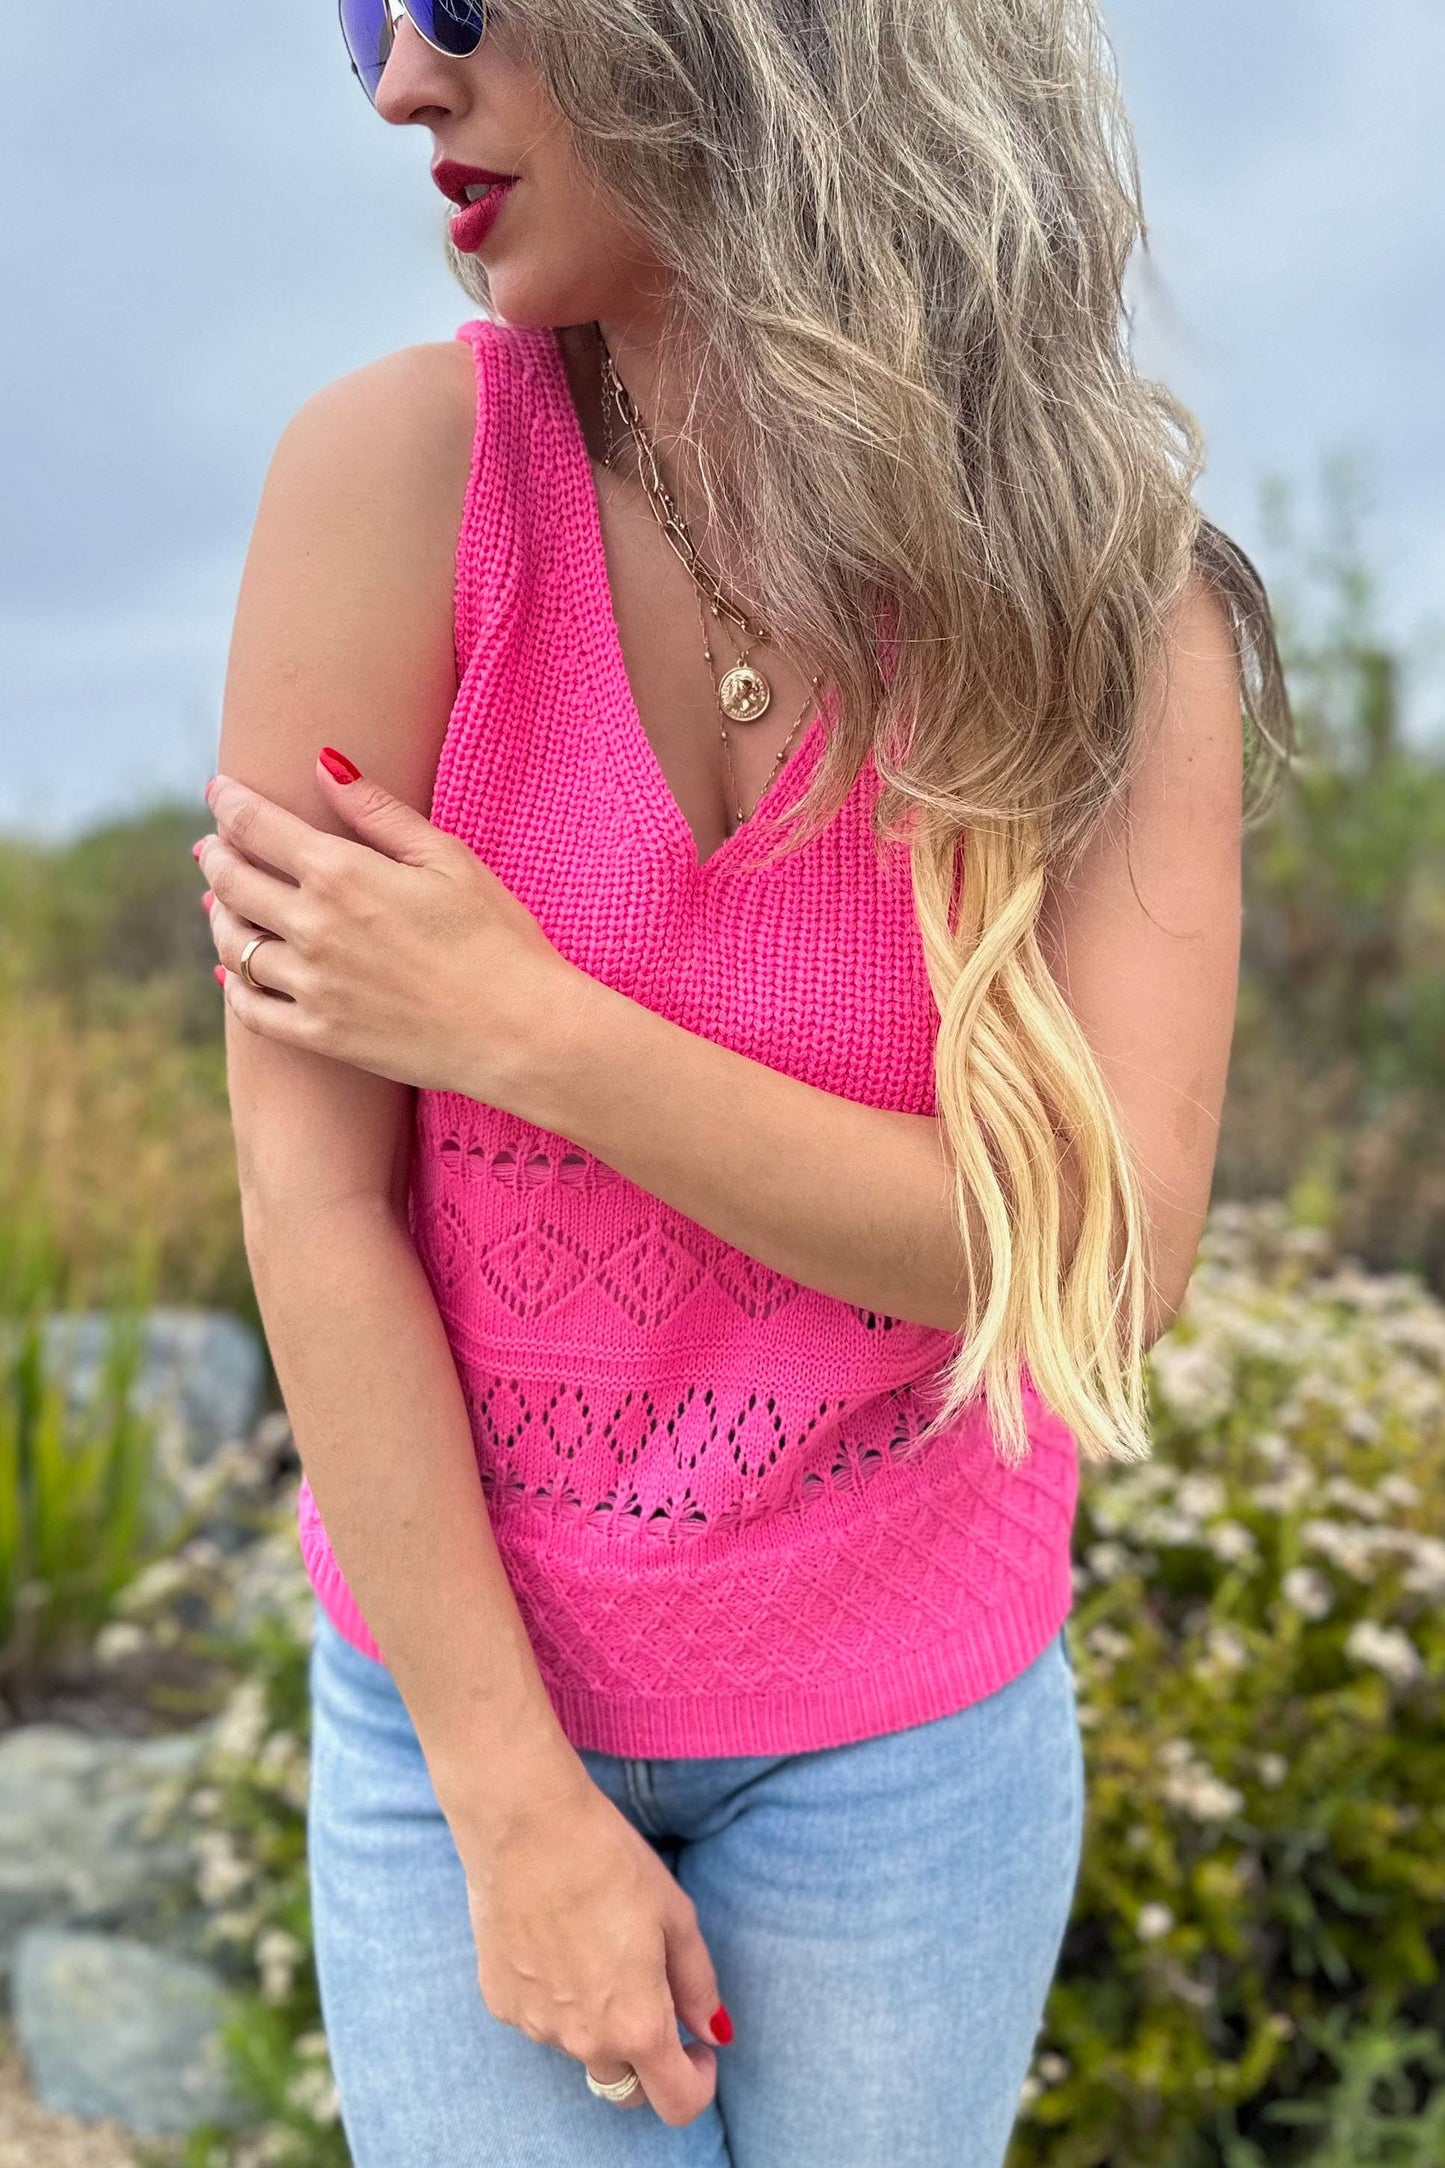 AMOLI - Neon Pink Textured Knit V Neck Sweater Tank Top: M/L / Neon Pink $45